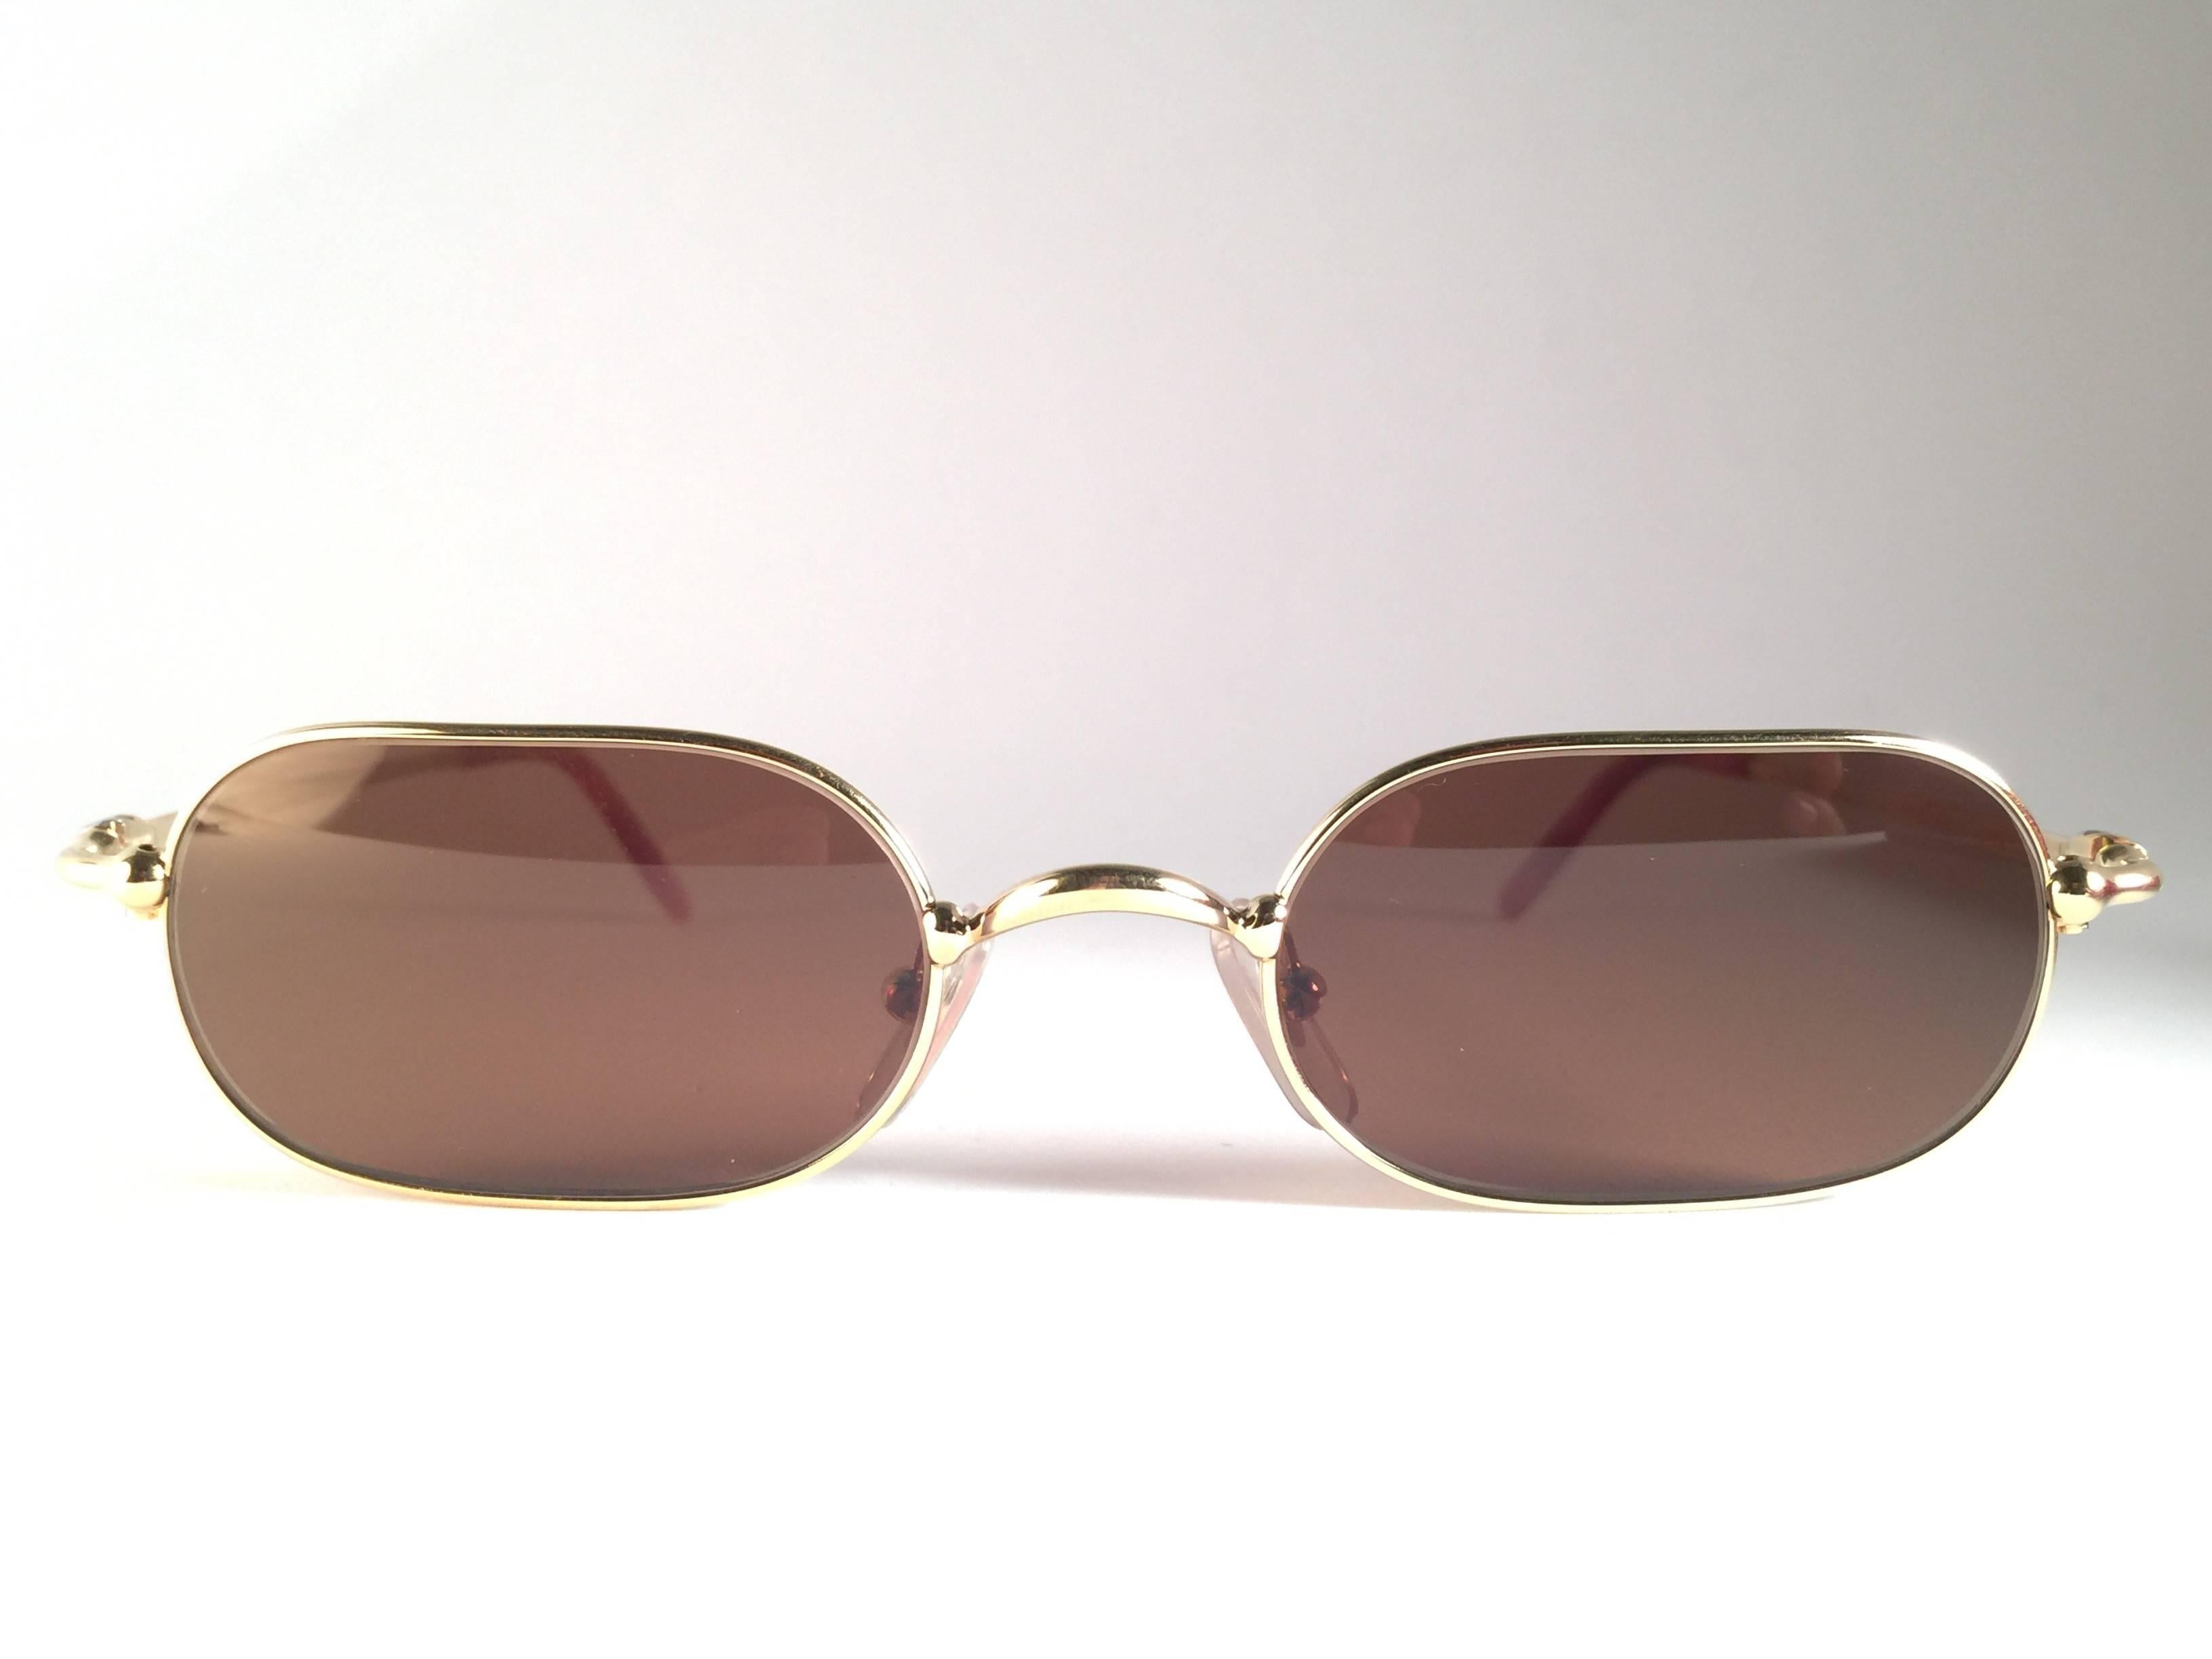 
New 1990 Cartier Orfy 50 [] 21 Sunglasses with brown (uv protection) lenses.
All hallmarks. Cartier gold signs on the ear paddles. These are like a pair of jewels on your nose. Beautiful design and a real sign of the times. Please notice this item